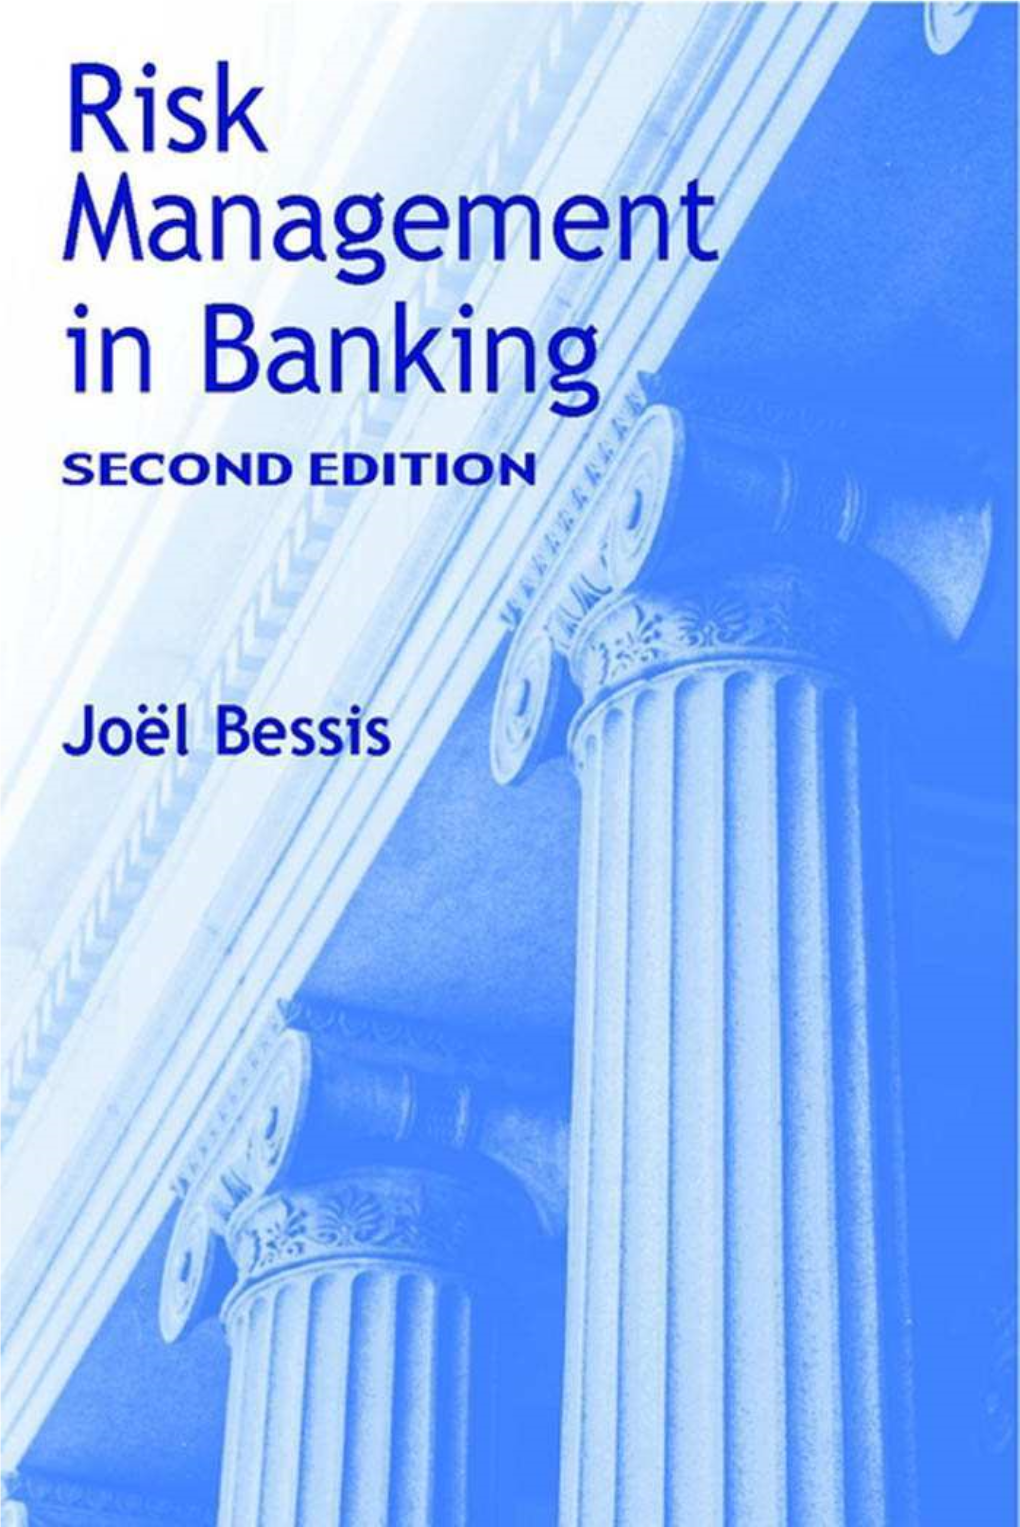 Bessis, J. Risk Management in Banking, 2001